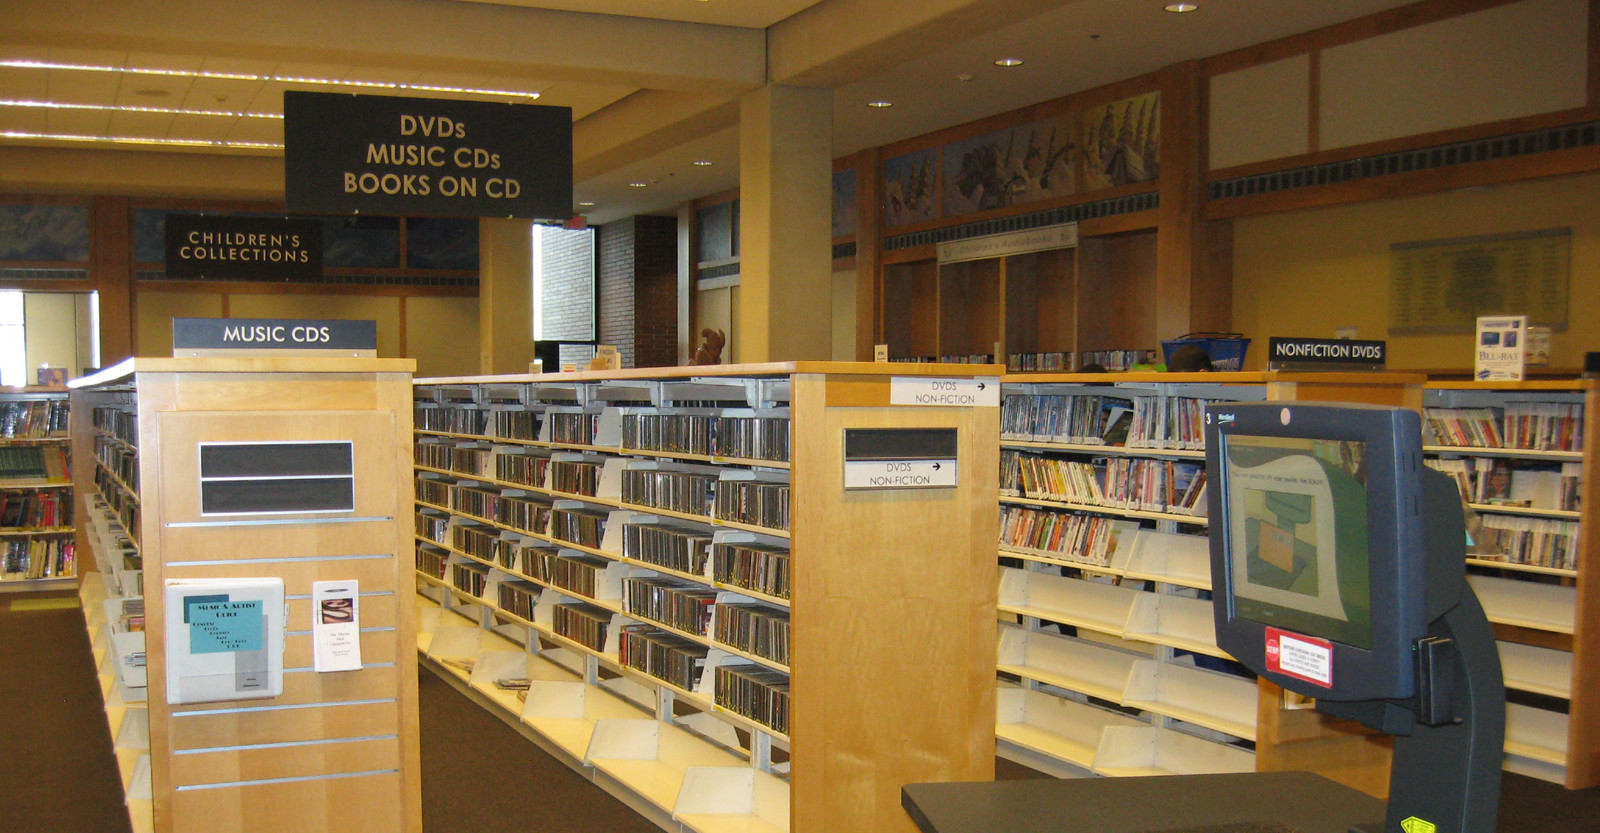 Photo showing the racks of DVD's available to rent from the library